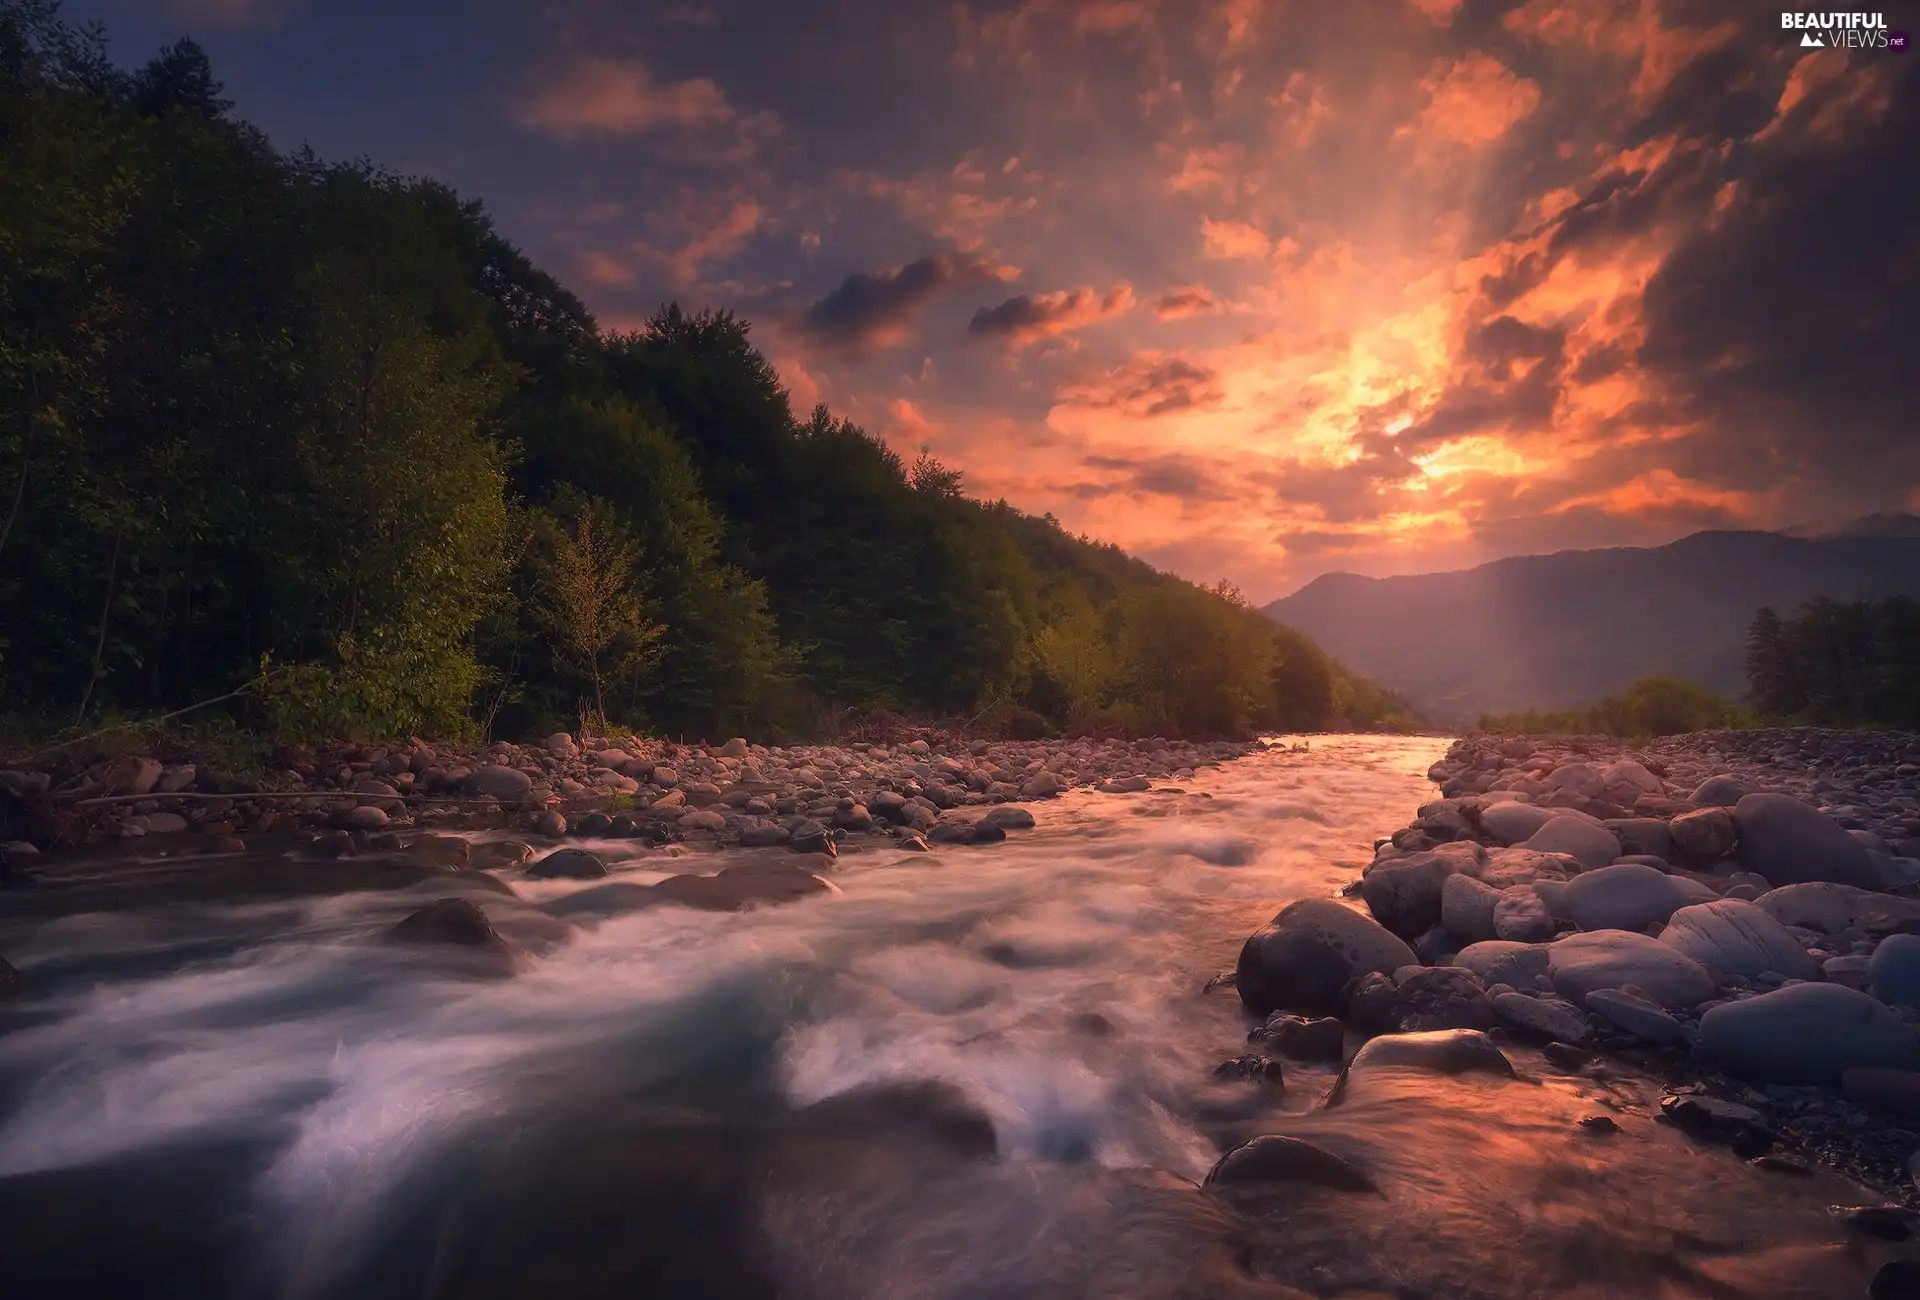 Georgia, Great Sunsets, viewes, Mountains, trees, Racha-Lechkhumi Region, Rioni River, Stones